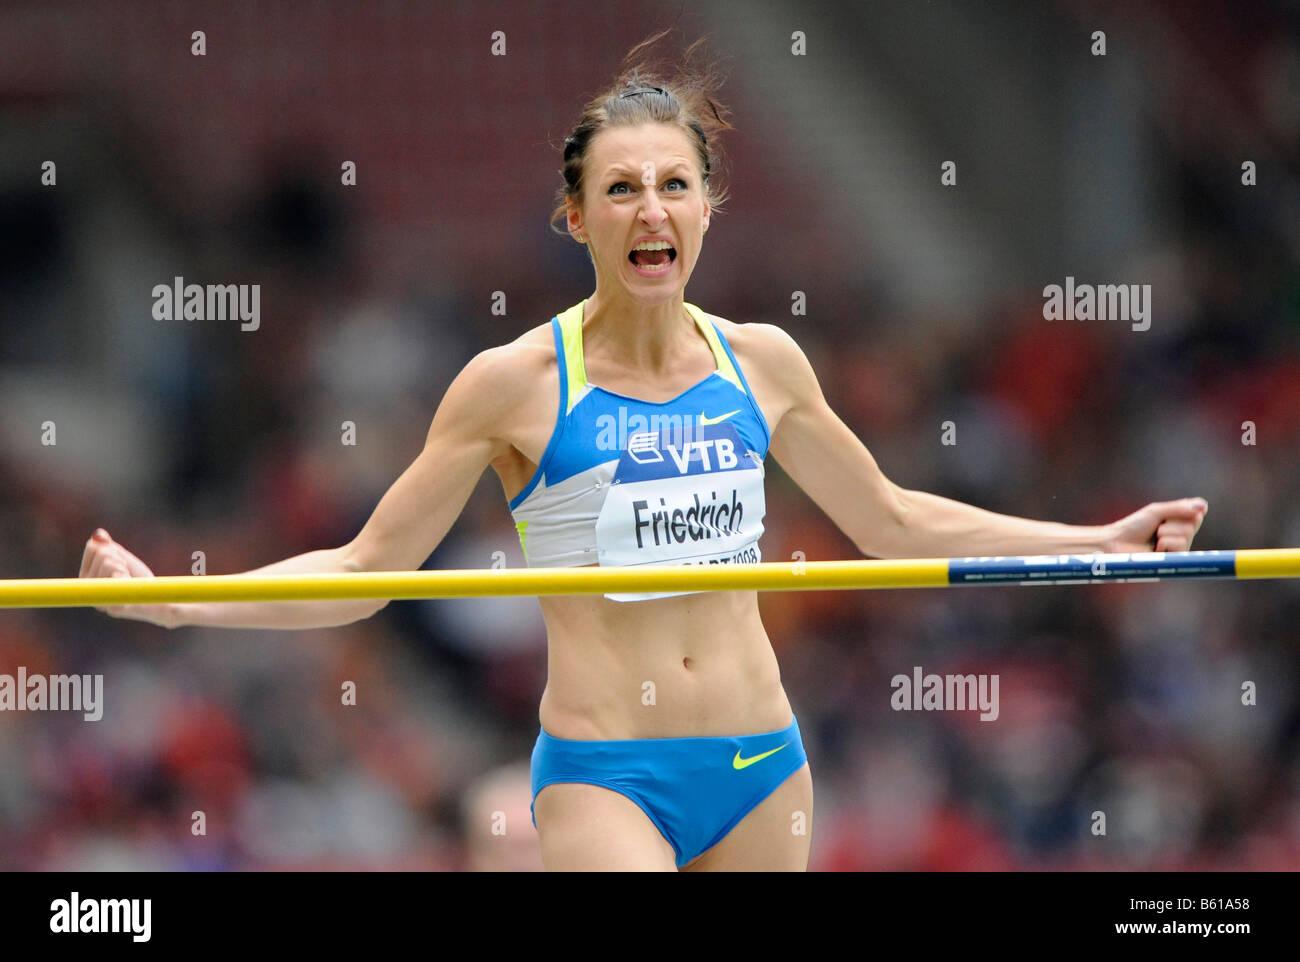 Ariane FRIEDRICH, GER, High Jump, at the IAAF 2008 World Athletics Final for track and field in the Mercedes-Benz Arena Stock Photo